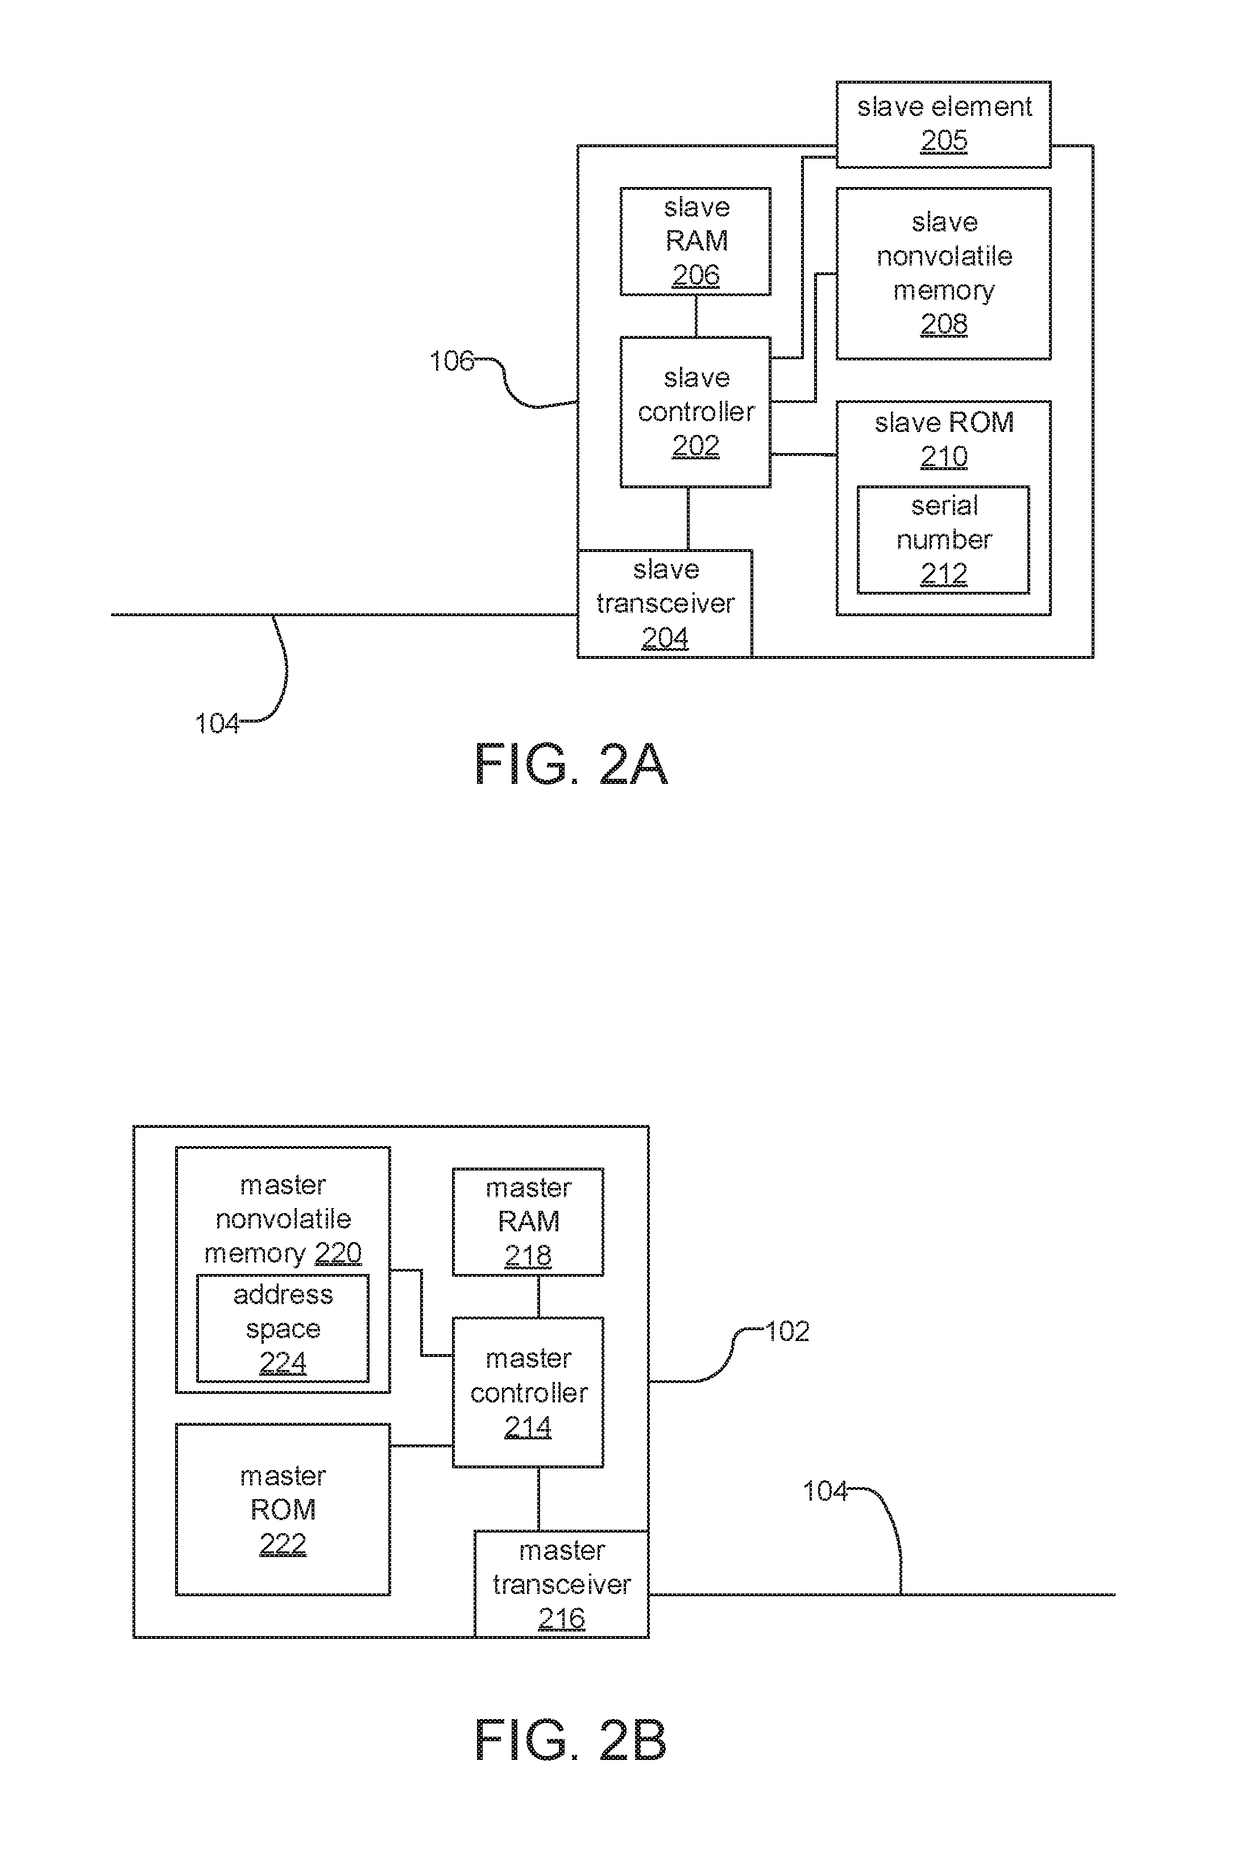 Addressing method for slave units in fire detection system